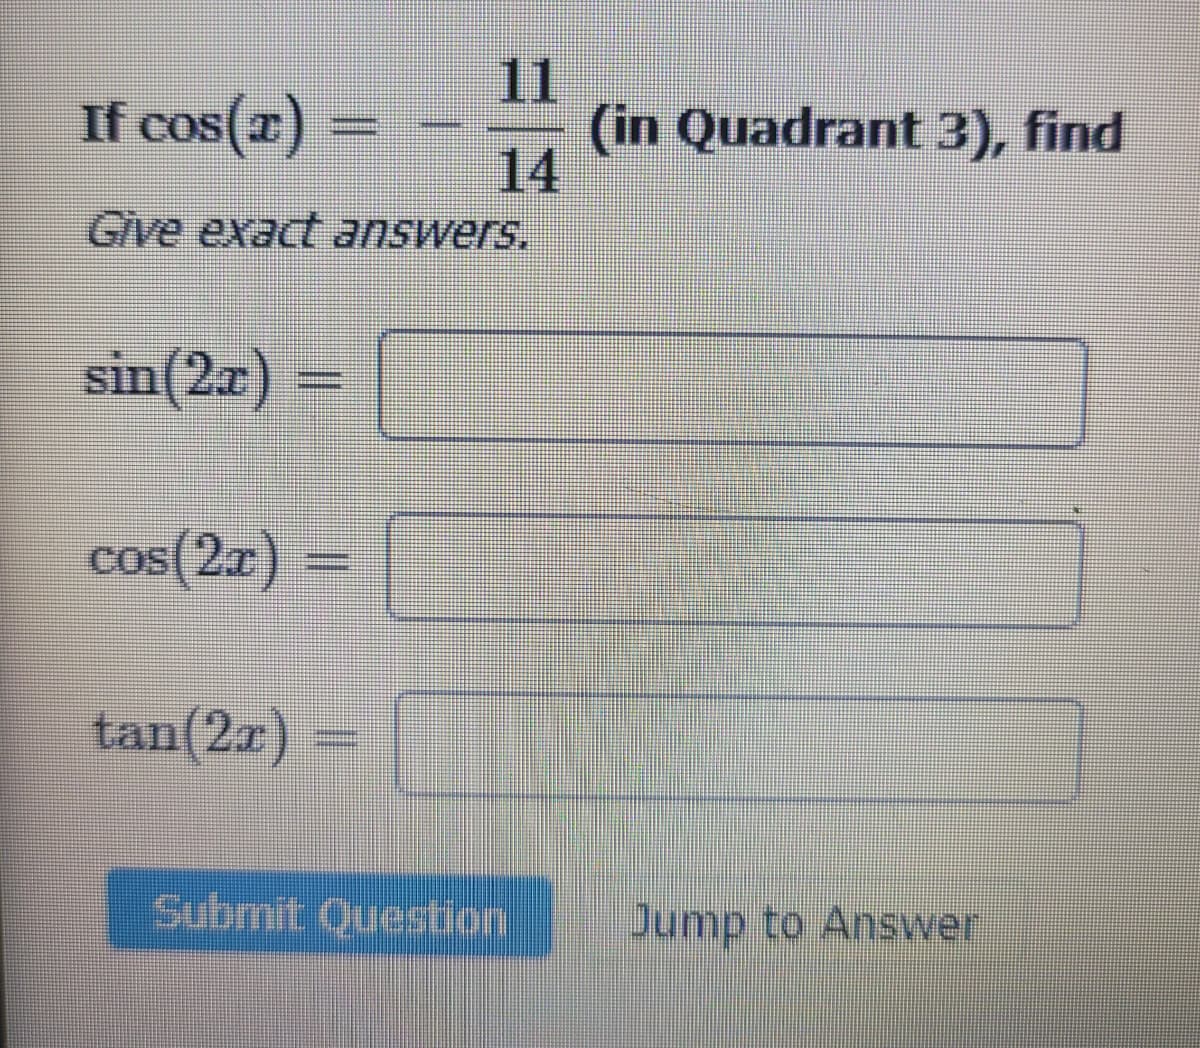 If cos(x) =
Give exact answers.
sin(2x) =
cos(2x) =
11
14
tan(2x)
Submit Question
(in Quadrant 3), find
Jump to Answer